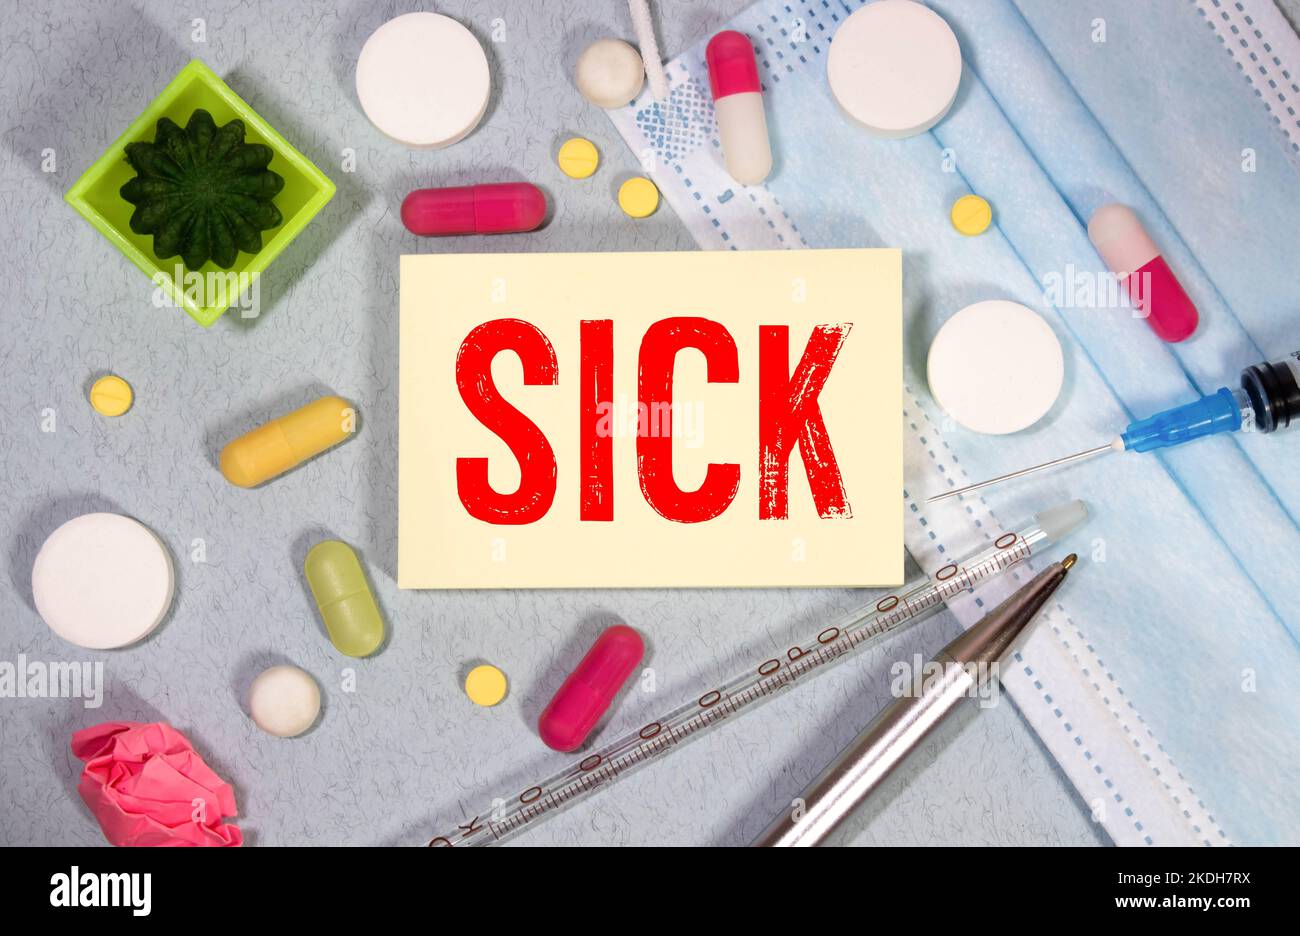 SICK word made on a torn paper, medical concept background. Stock Photo